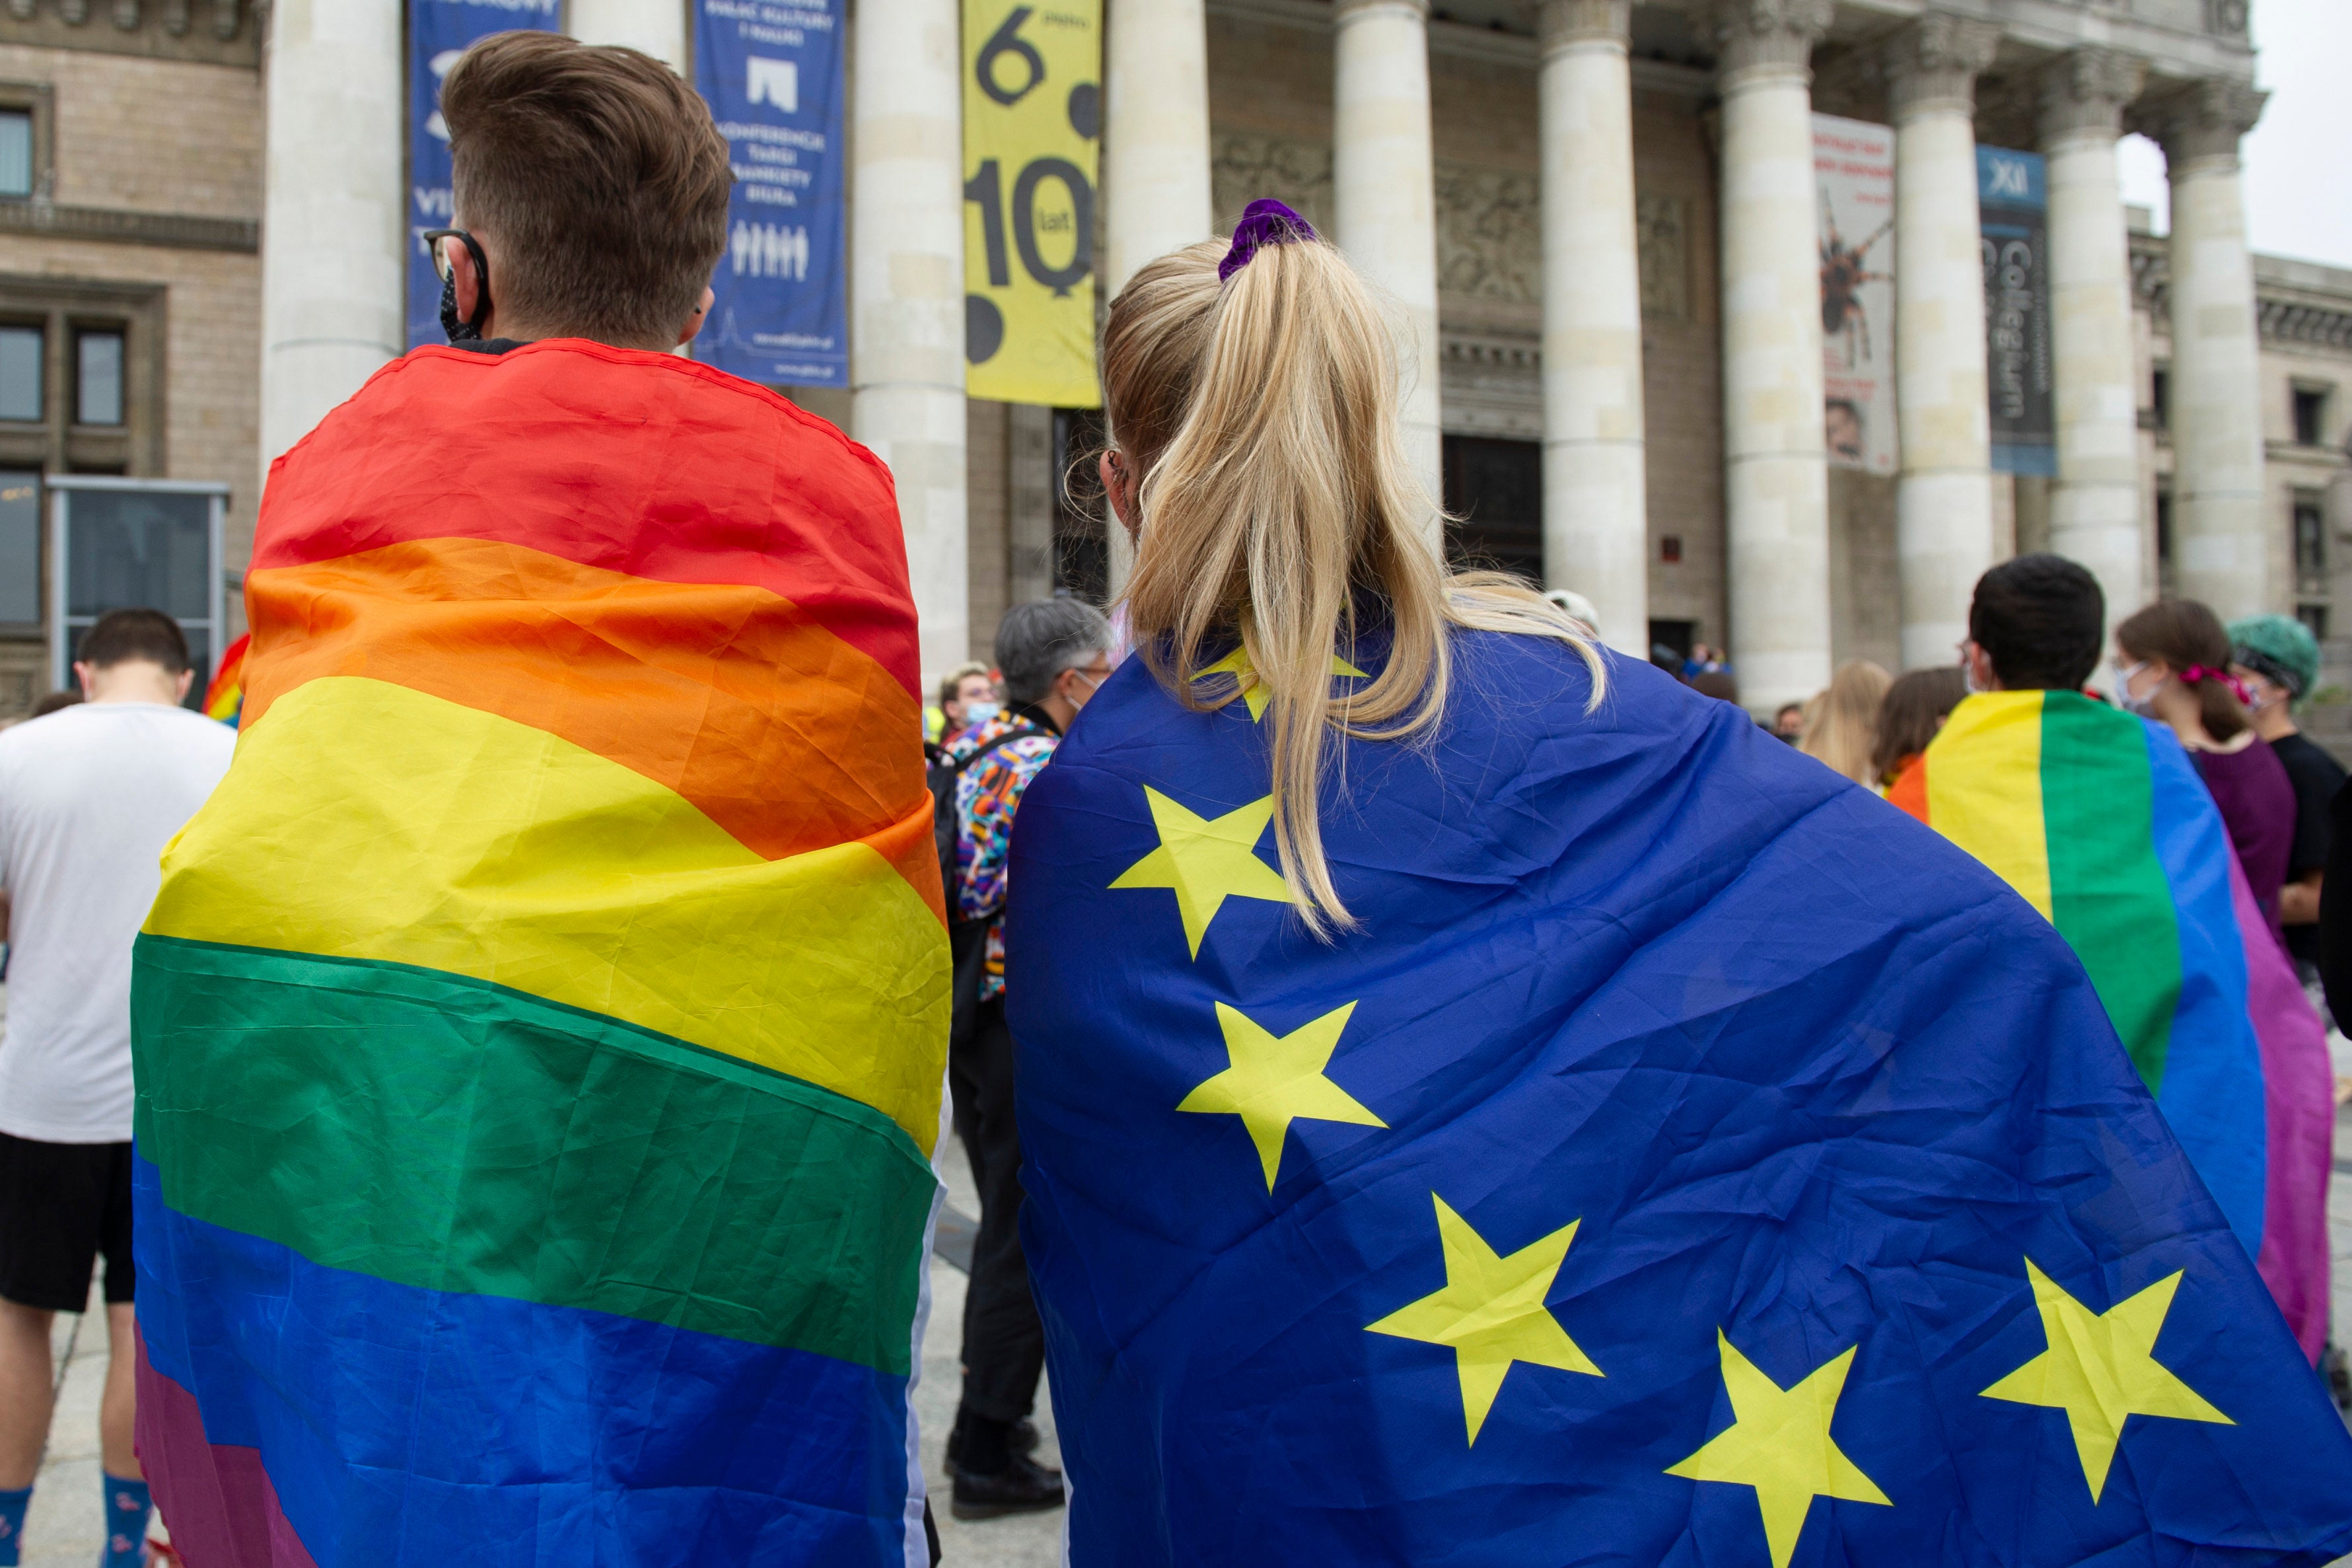 Demonstrators wrapped in LGBT and European Union flags are seen on August 30, 2020 in Warsaw, Poland. © 2020 Aleksander Kalka/NurPhoto via AP